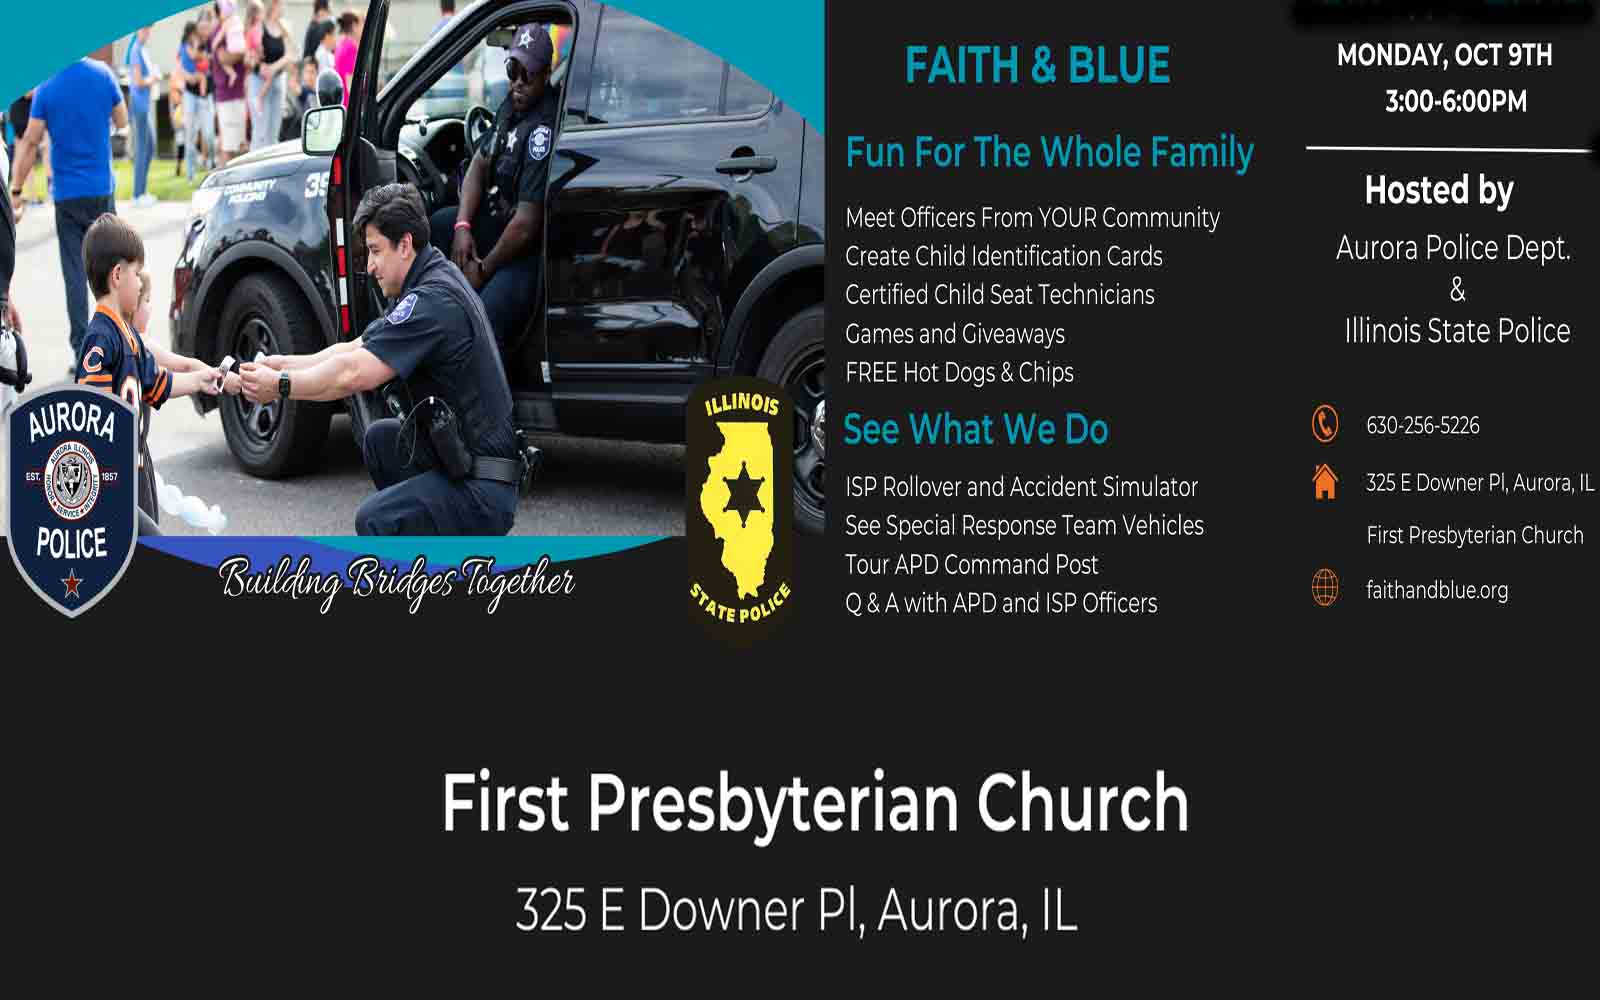 Aurora Police Department and Illinois State Police Faith and Blue